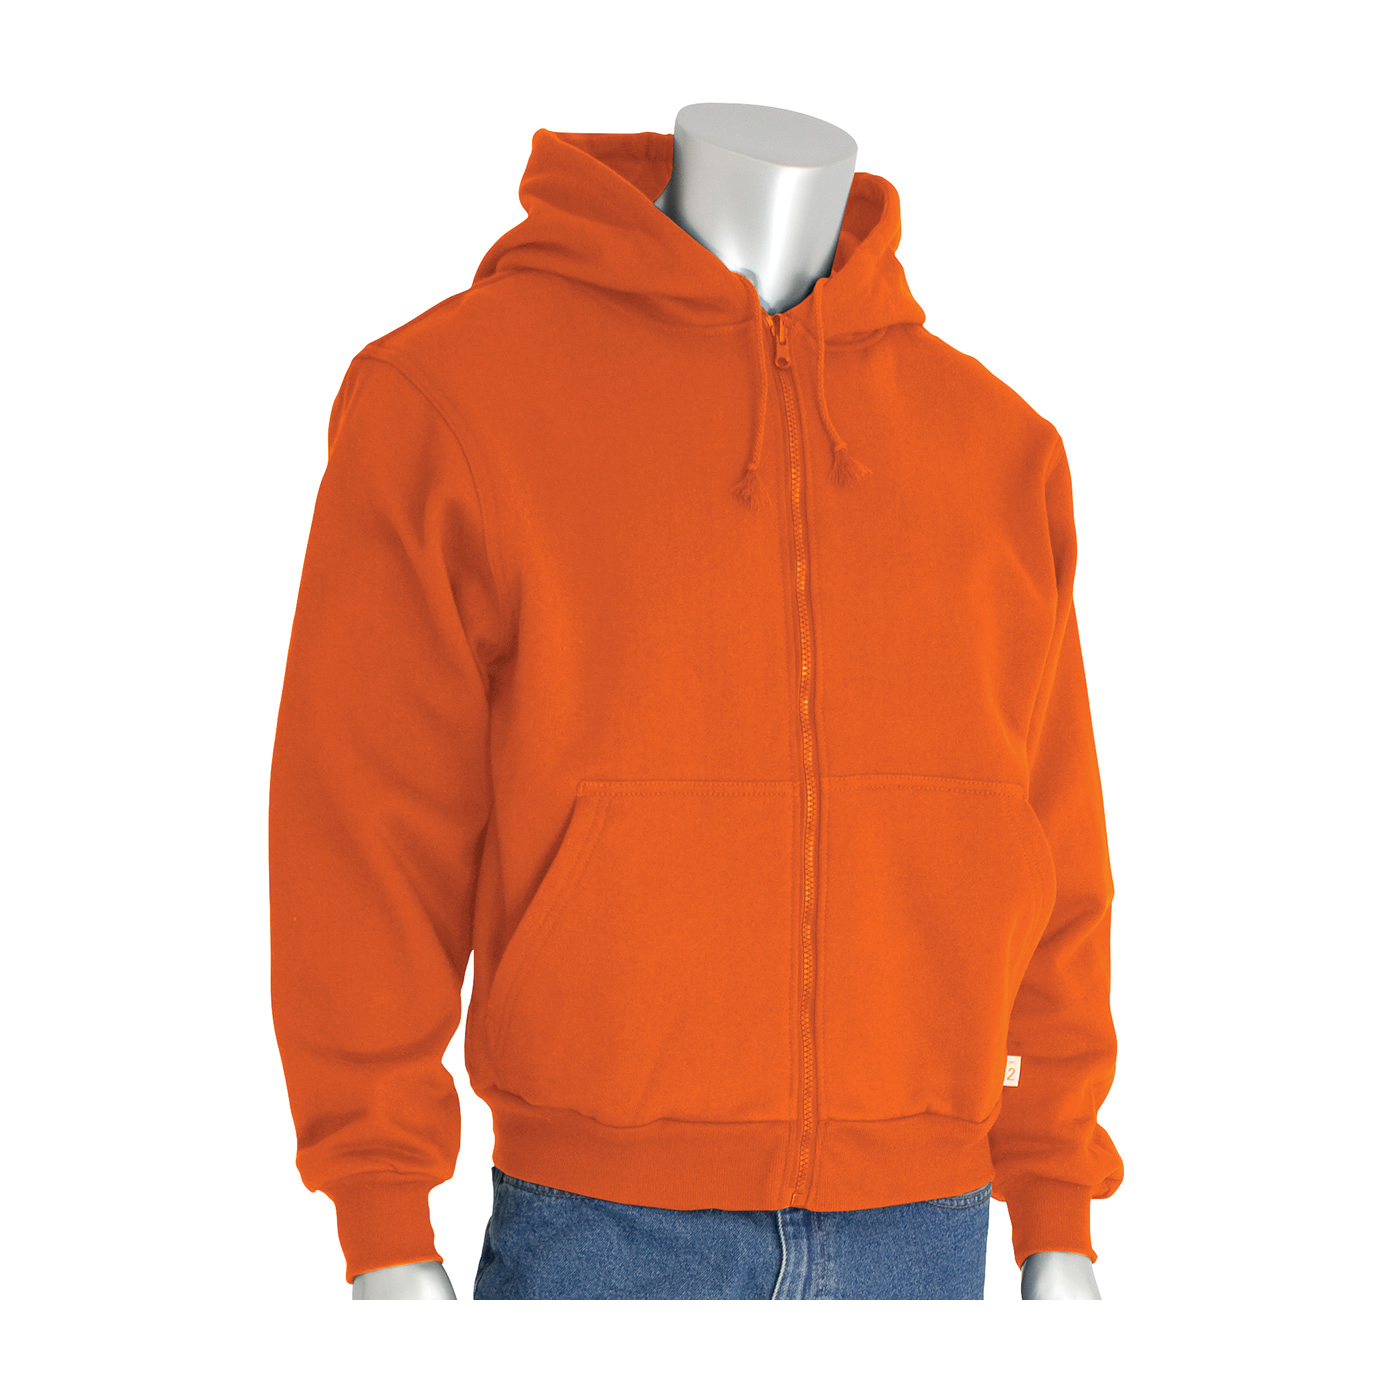 PIP® 385-FRZH-OR/2X Polartec® 385-FRZH Arc and Flame Resistant Sweatshirt, 2XL, Orange, FR Fleece Knit/100% Cotton, 30-1/2 in Regular, 31-1/2 in Tall L